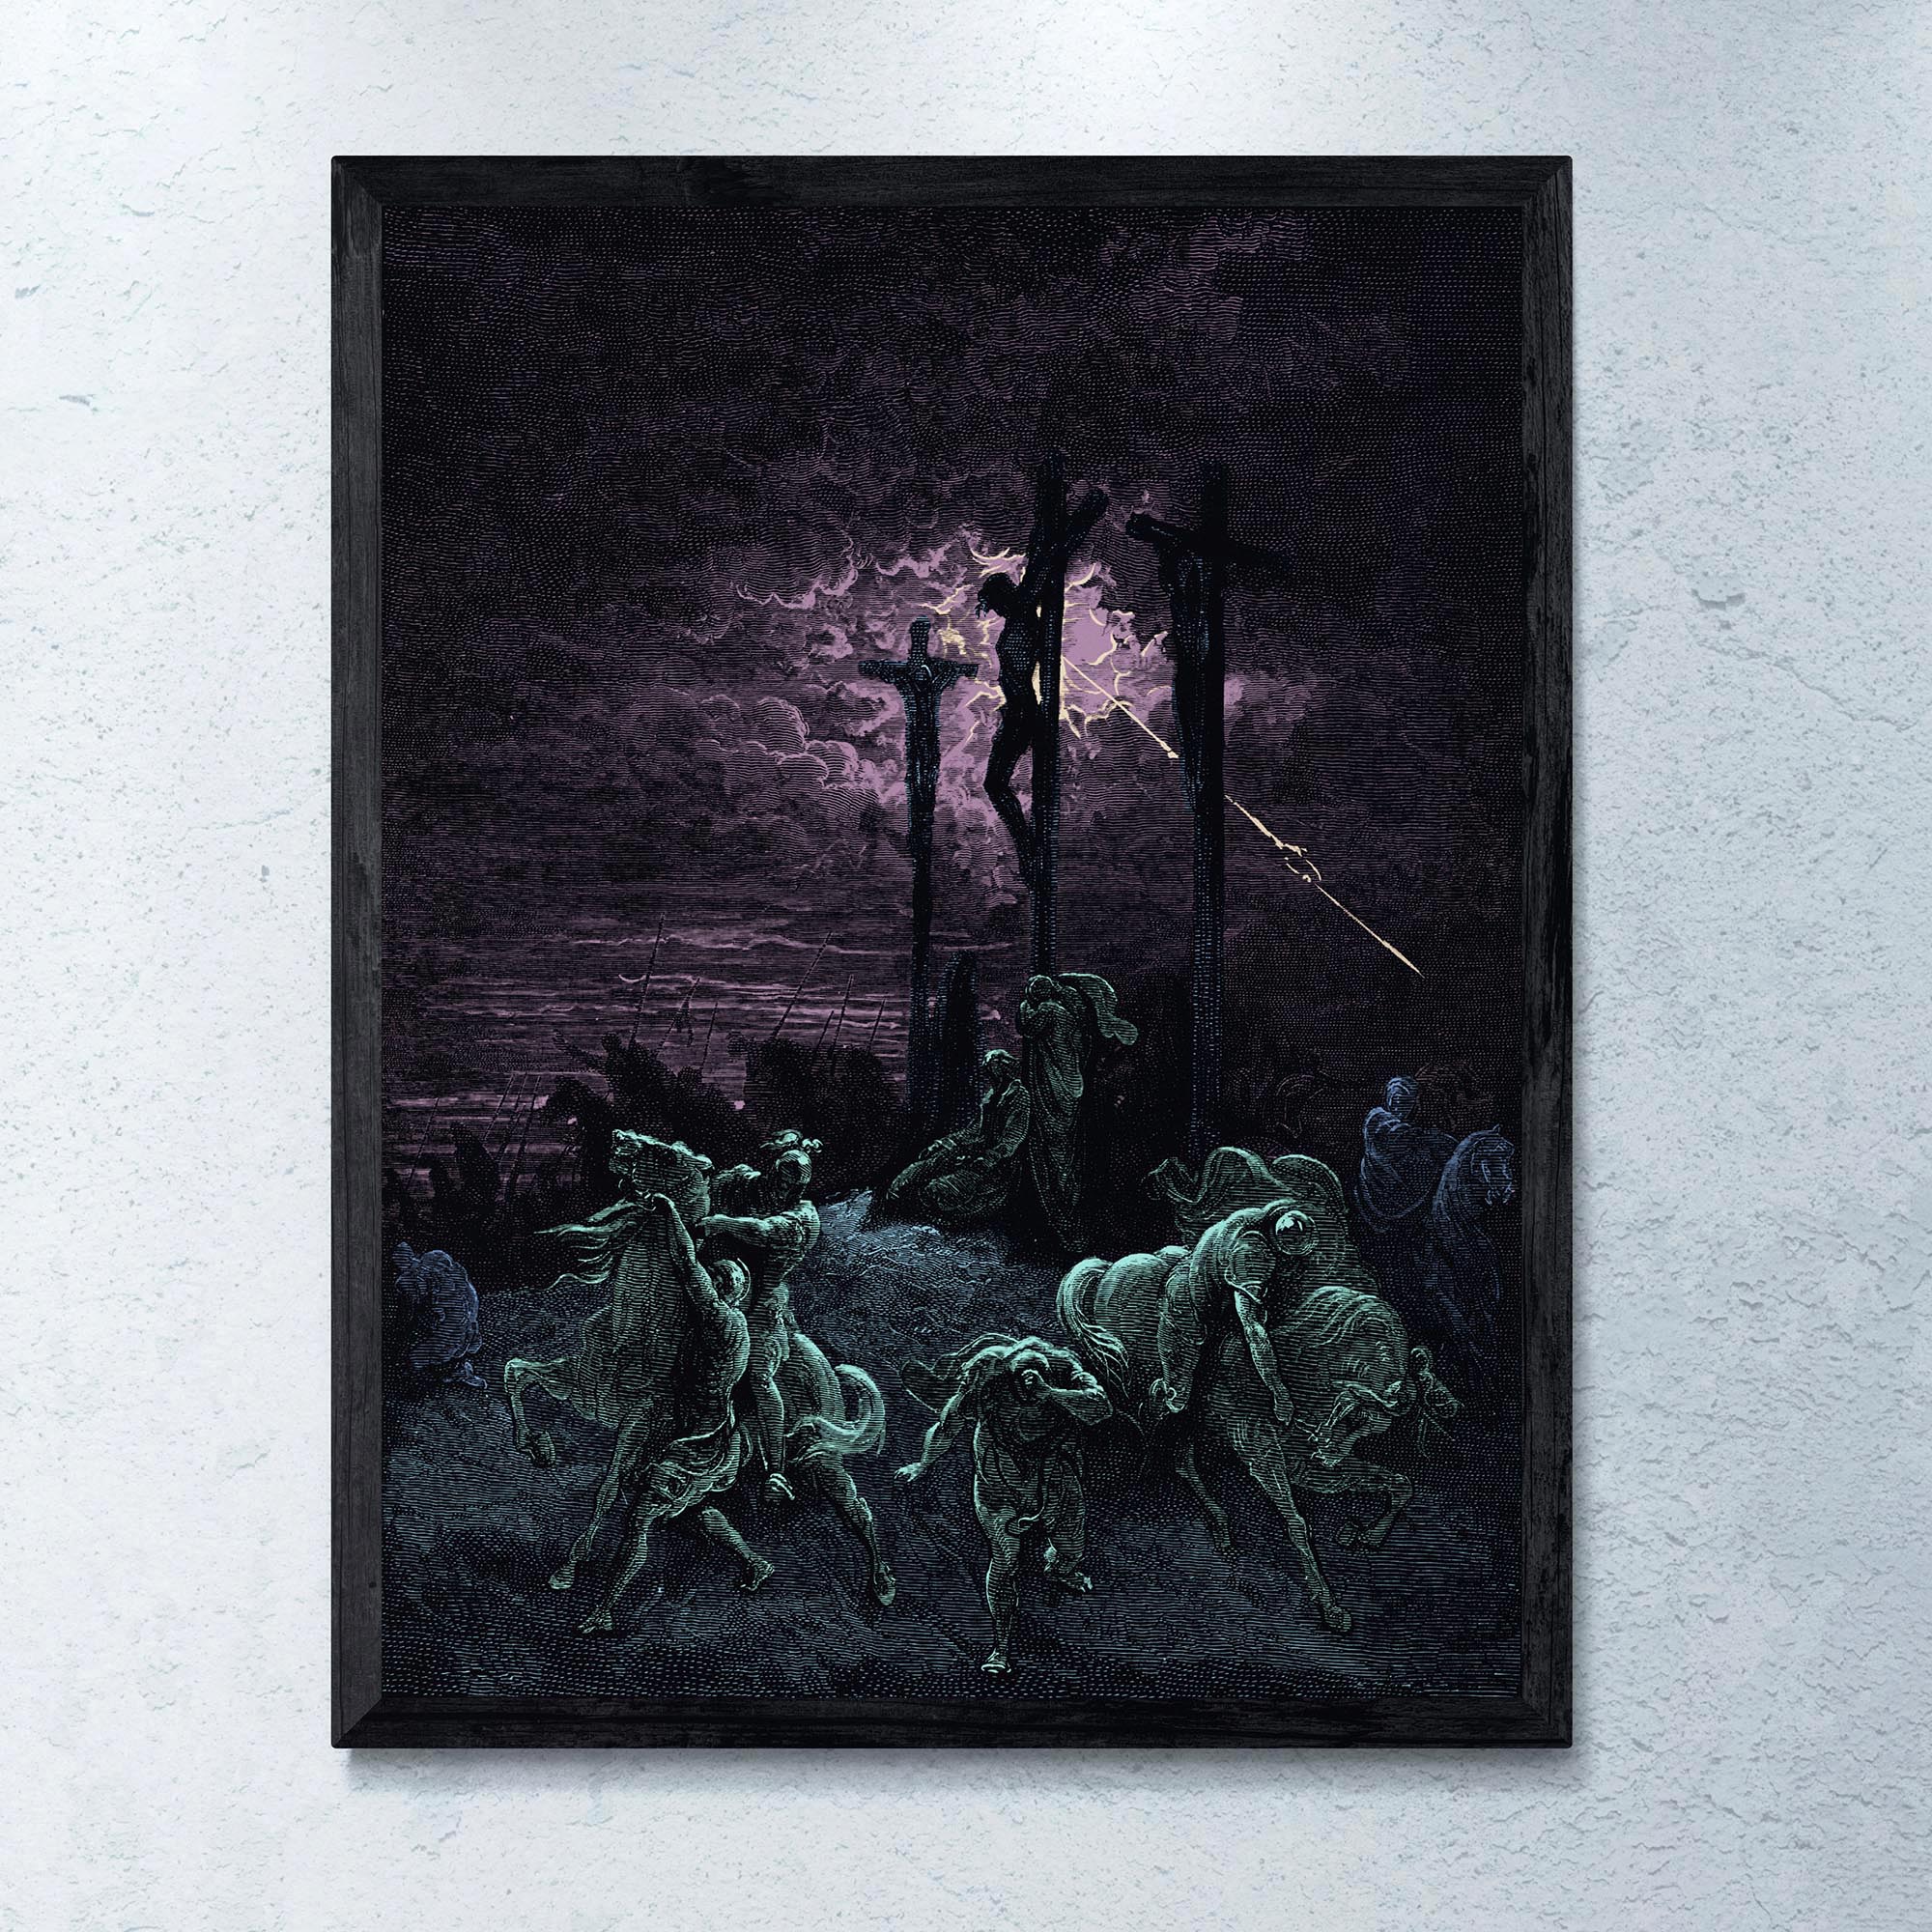 Fine art 6"x8" Darkness at the Crucifixion | Gustave Dore Paradise Lost, Dante | Surreal Full Color Eerie Christ Fine Art Print